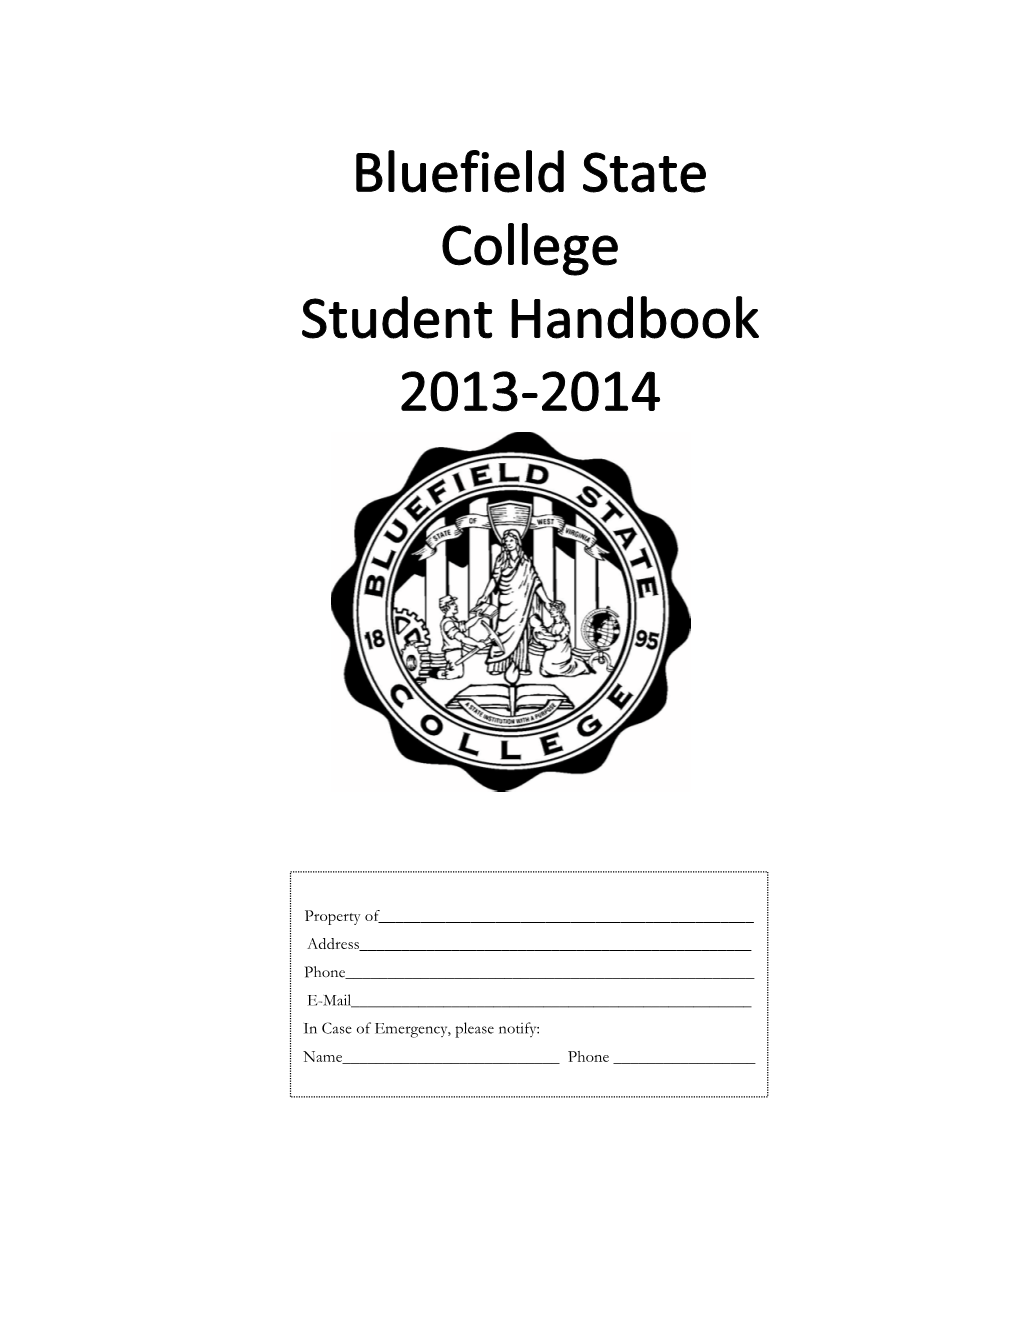 Student Handbook Will Be a Helpful and Meaningful Source of Information As You Proceed Through the 2012-2013 Academic Year